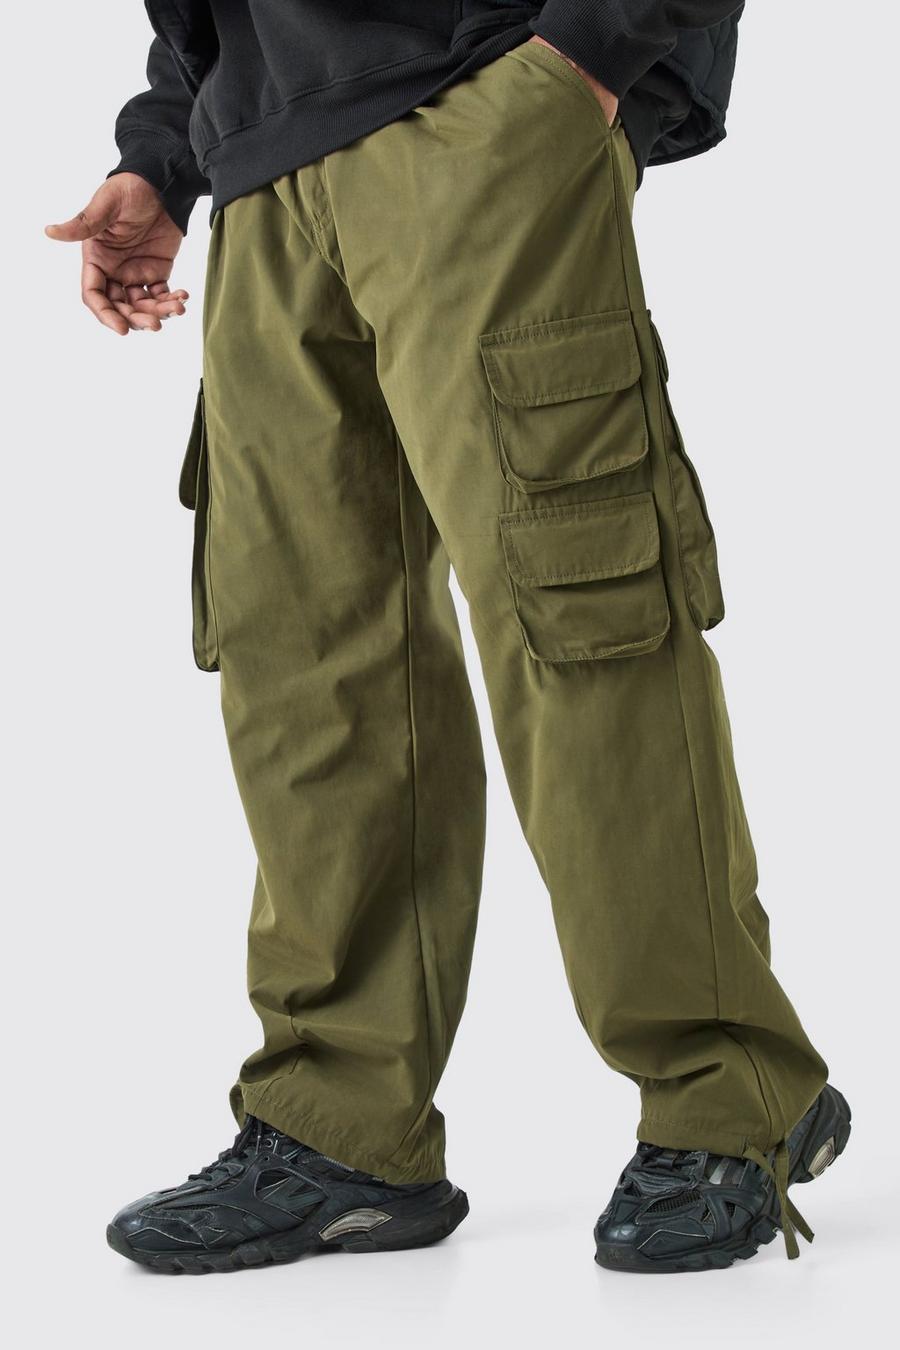 Size 40 Trousers, Large Men's Trousers